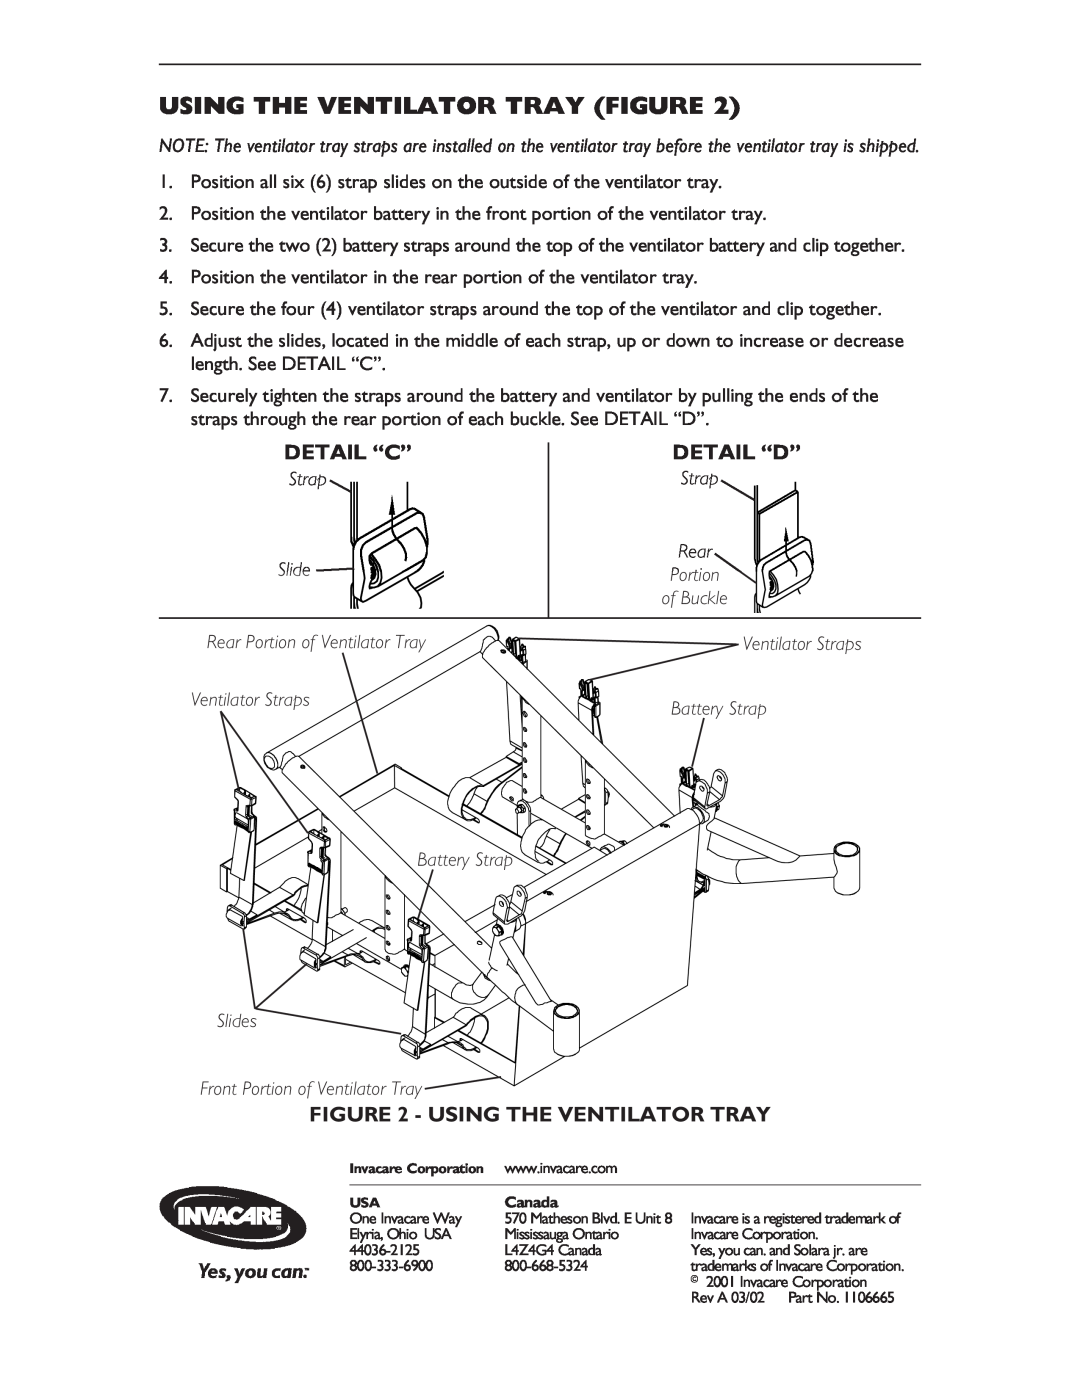 Invacare 1108526 operating instructions Using The Ventilator Tray Figure, Detail “C”, Detail “D” 